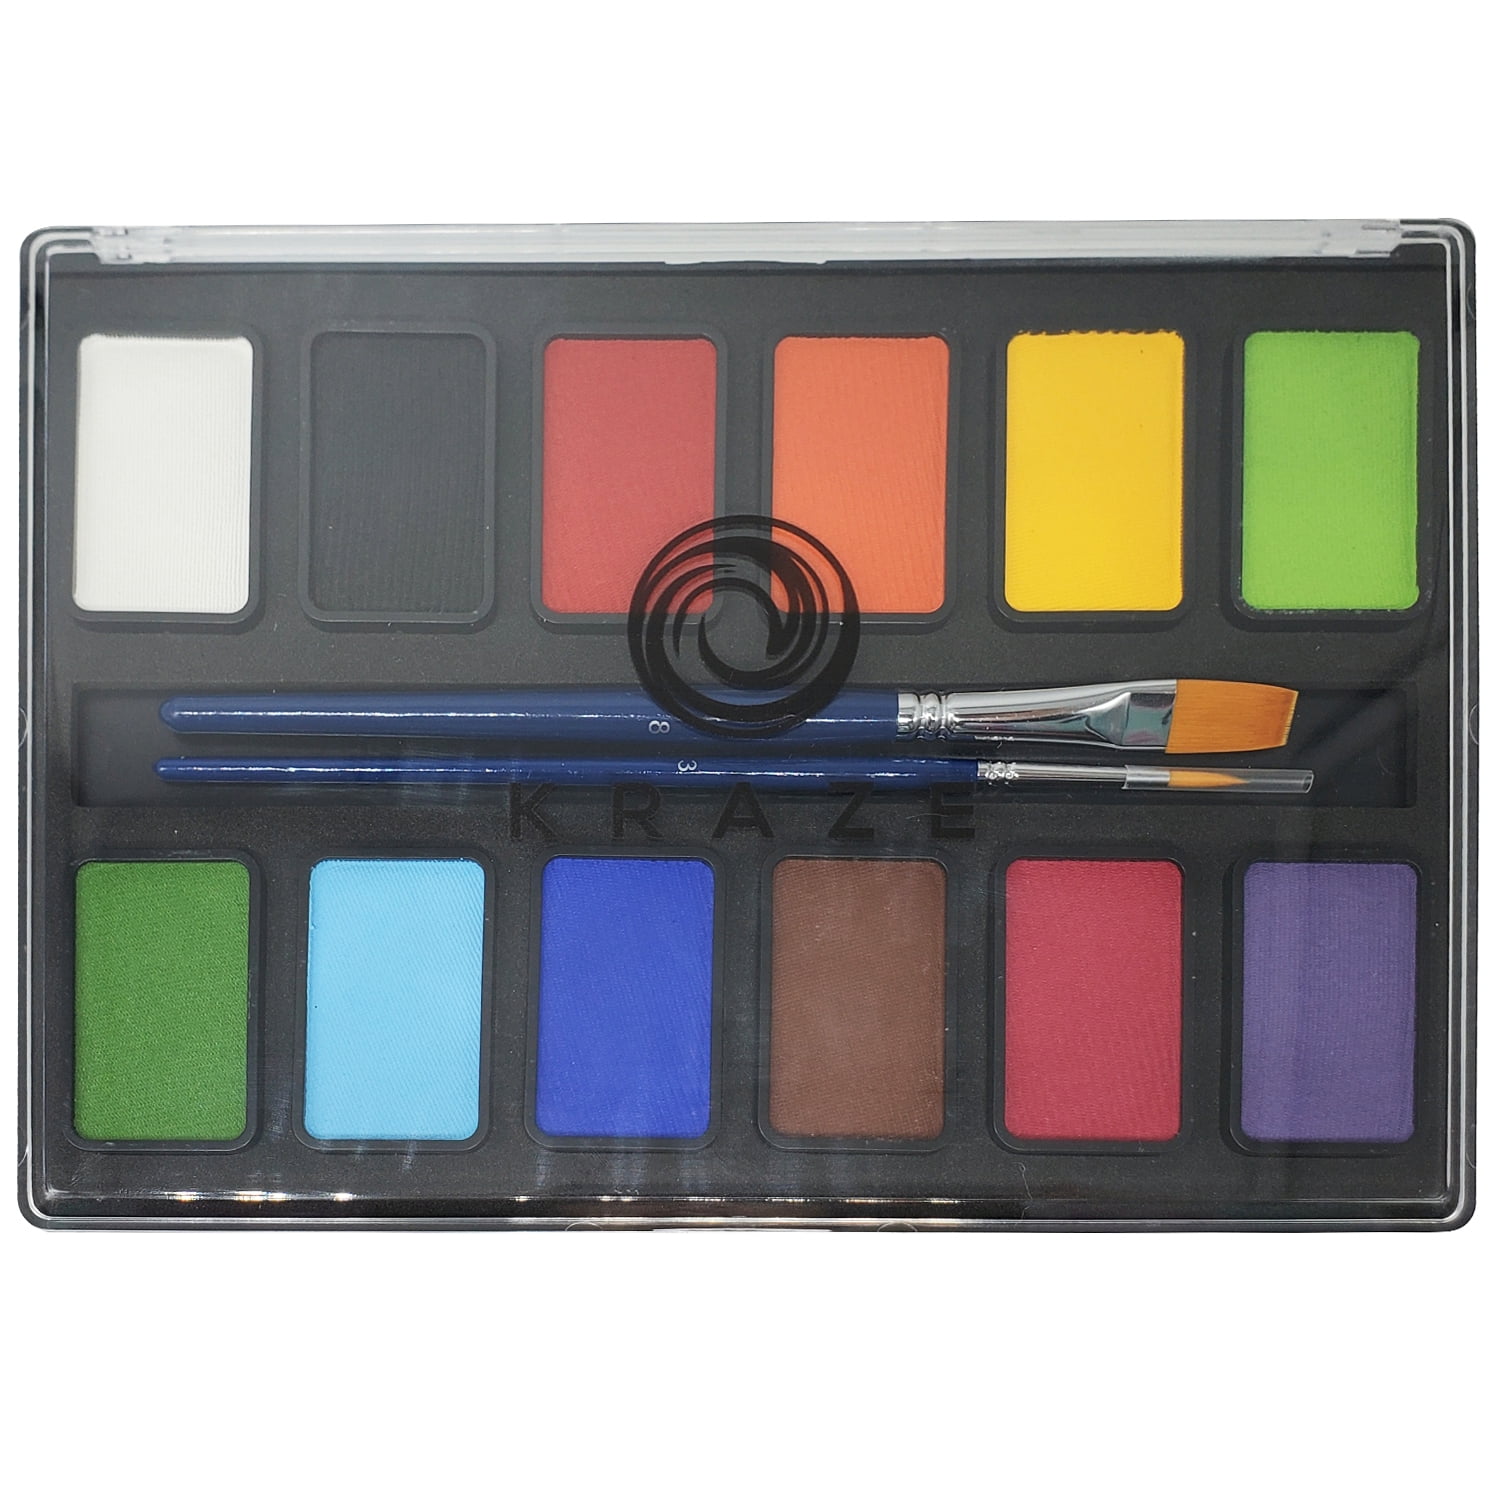 Face and Body Painting Palette with 12 Common Colors 10g each – Kryvaline  Body Art Makeup